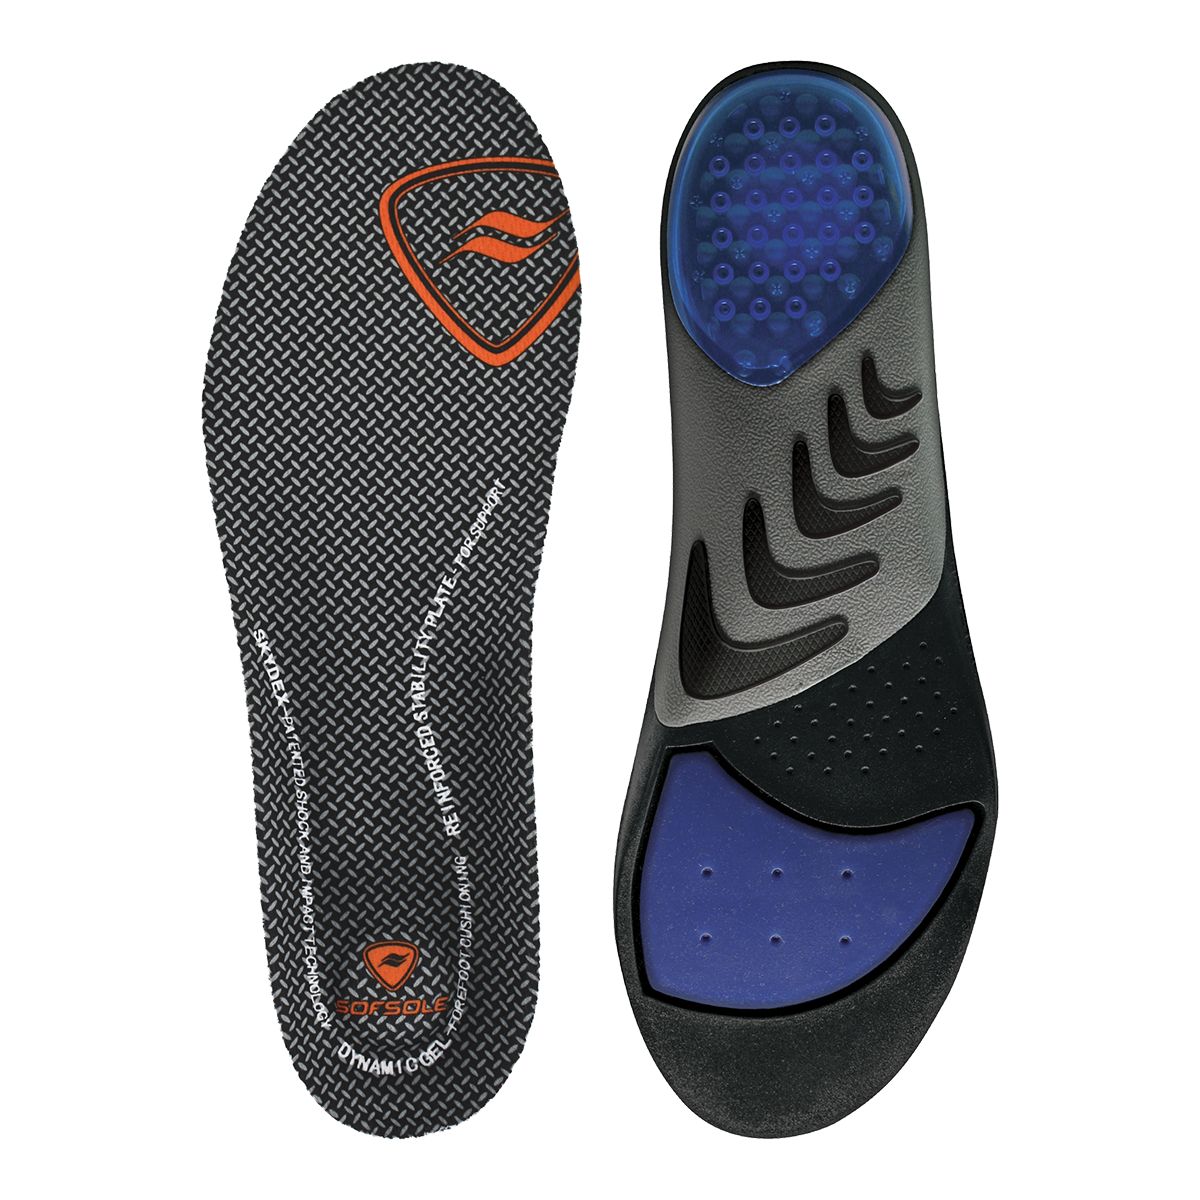 Sof Sole Airr Orthotic Insoles  Shoe Inserts